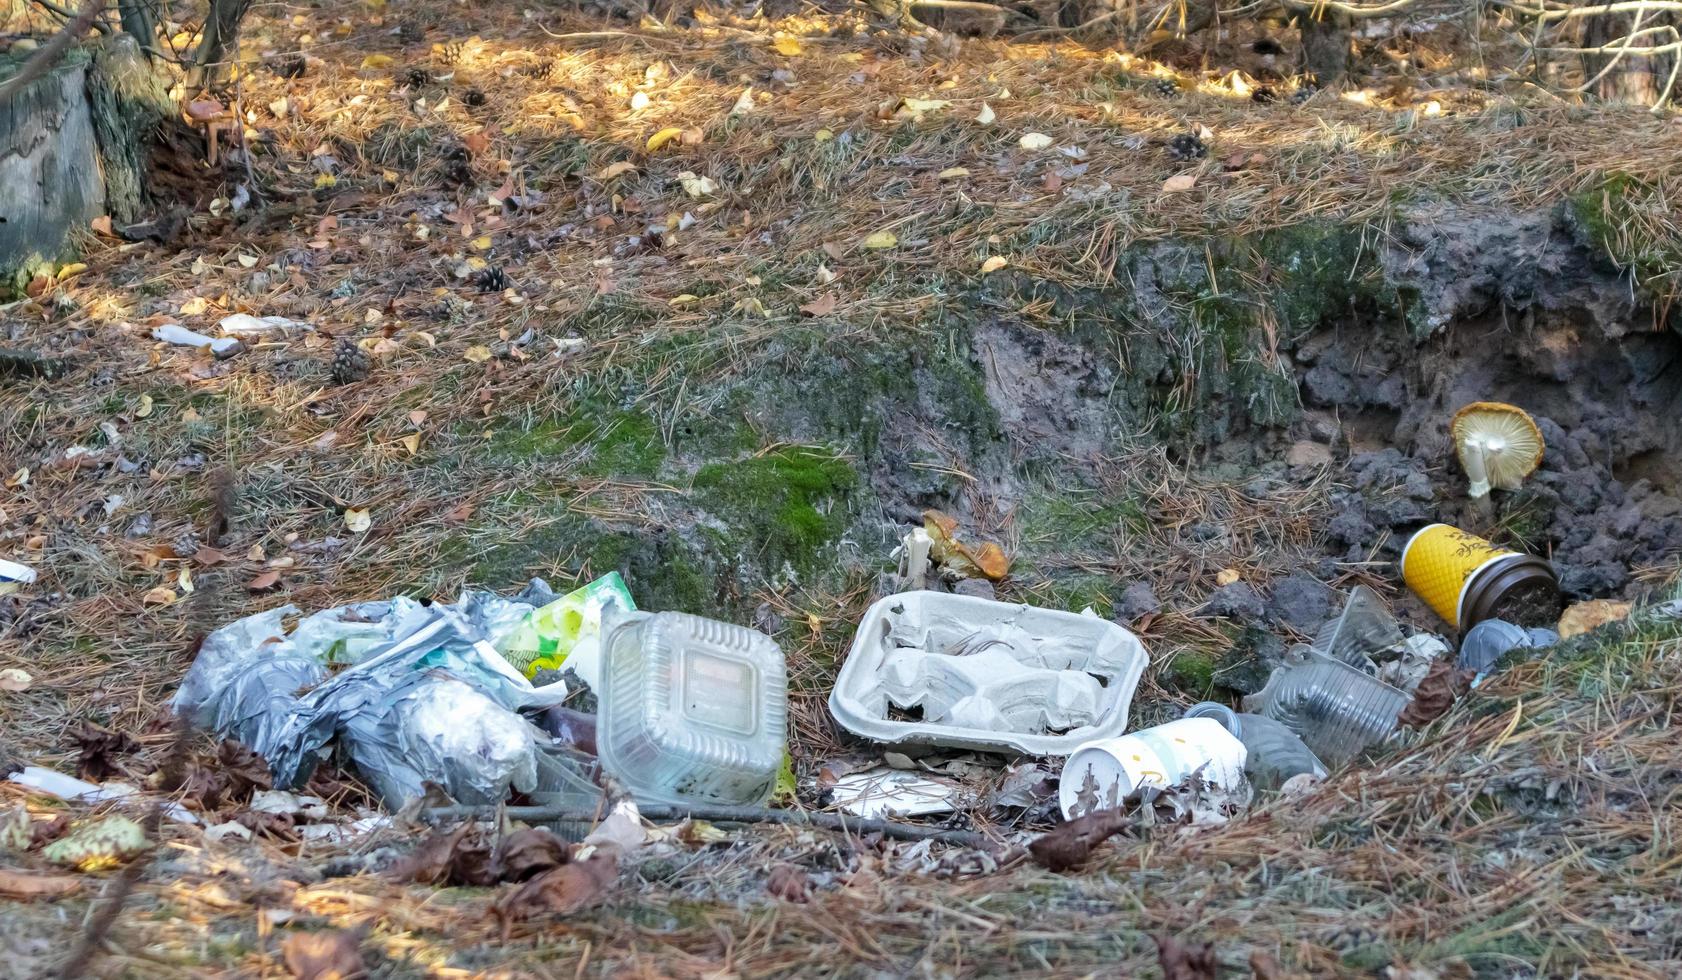 Garbage dump in the forest, pollution of nature. People illegally threw garbage into the forest. The concept of man and nature. Dirty environment polluting garbage near the hiking trail in the forest. photo